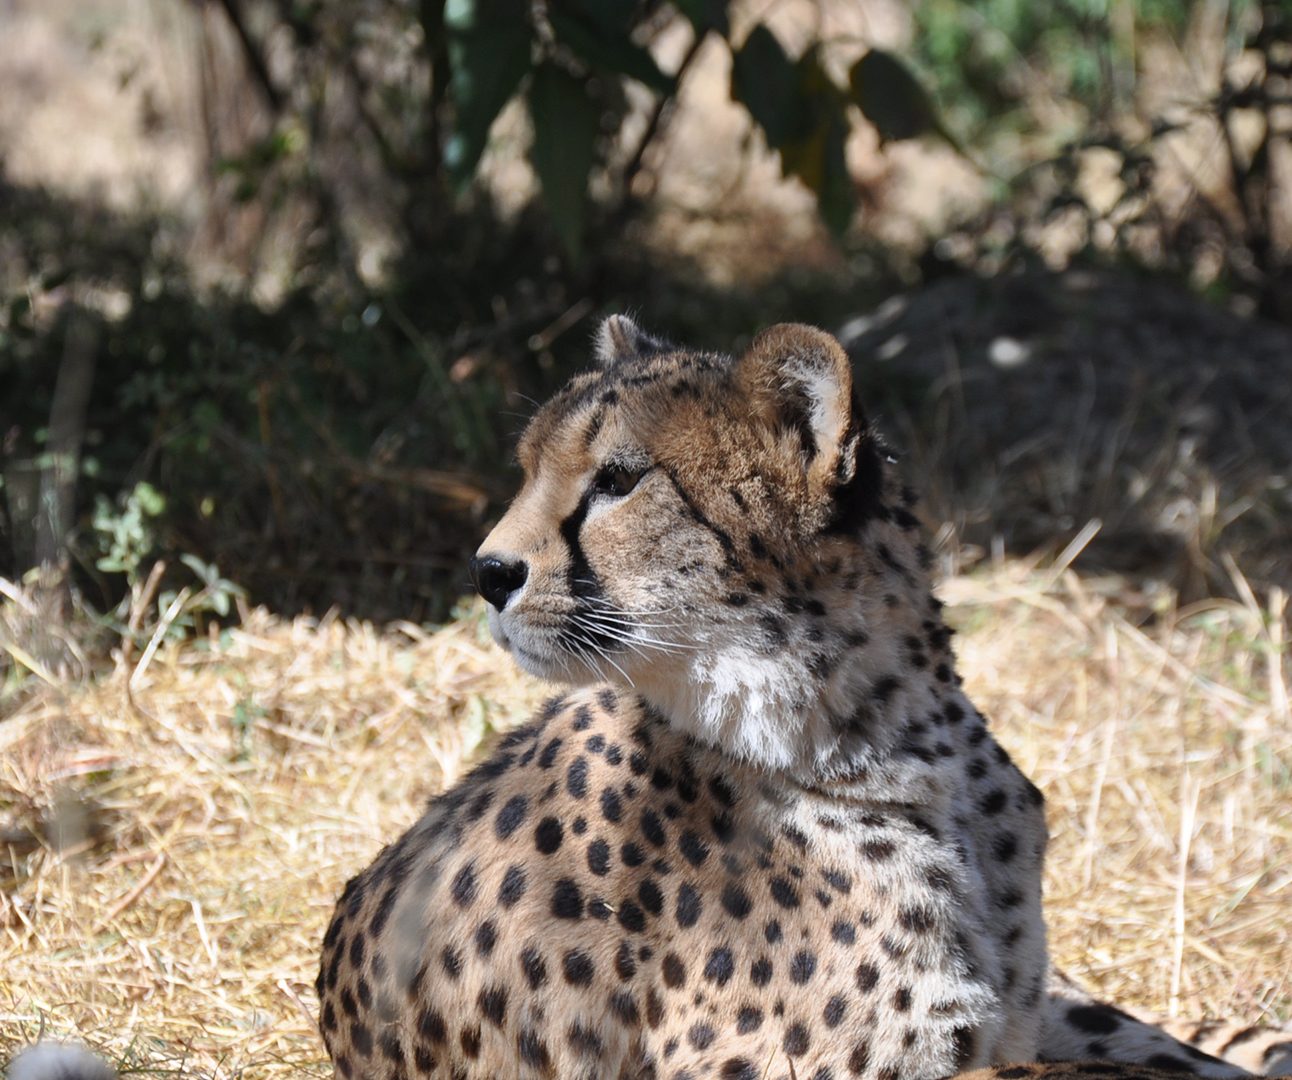 A cheetah lying on the ground with head raised, looking to the side